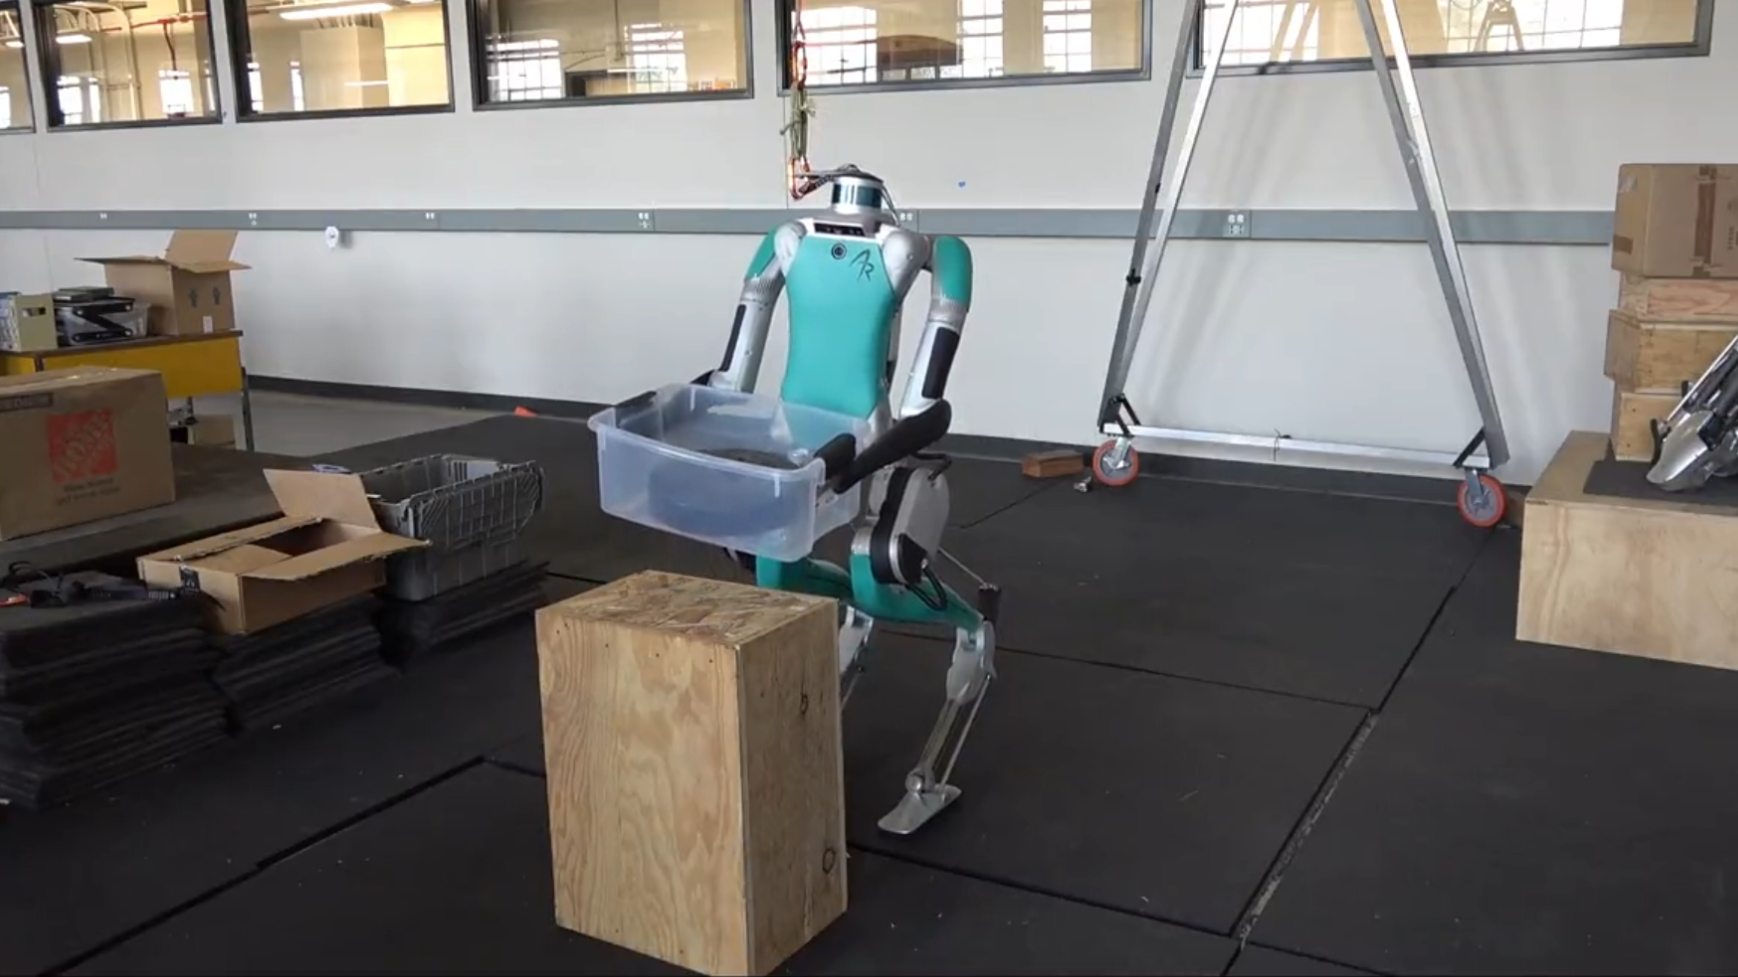 Digit humanoid robot picking up a plastic tote